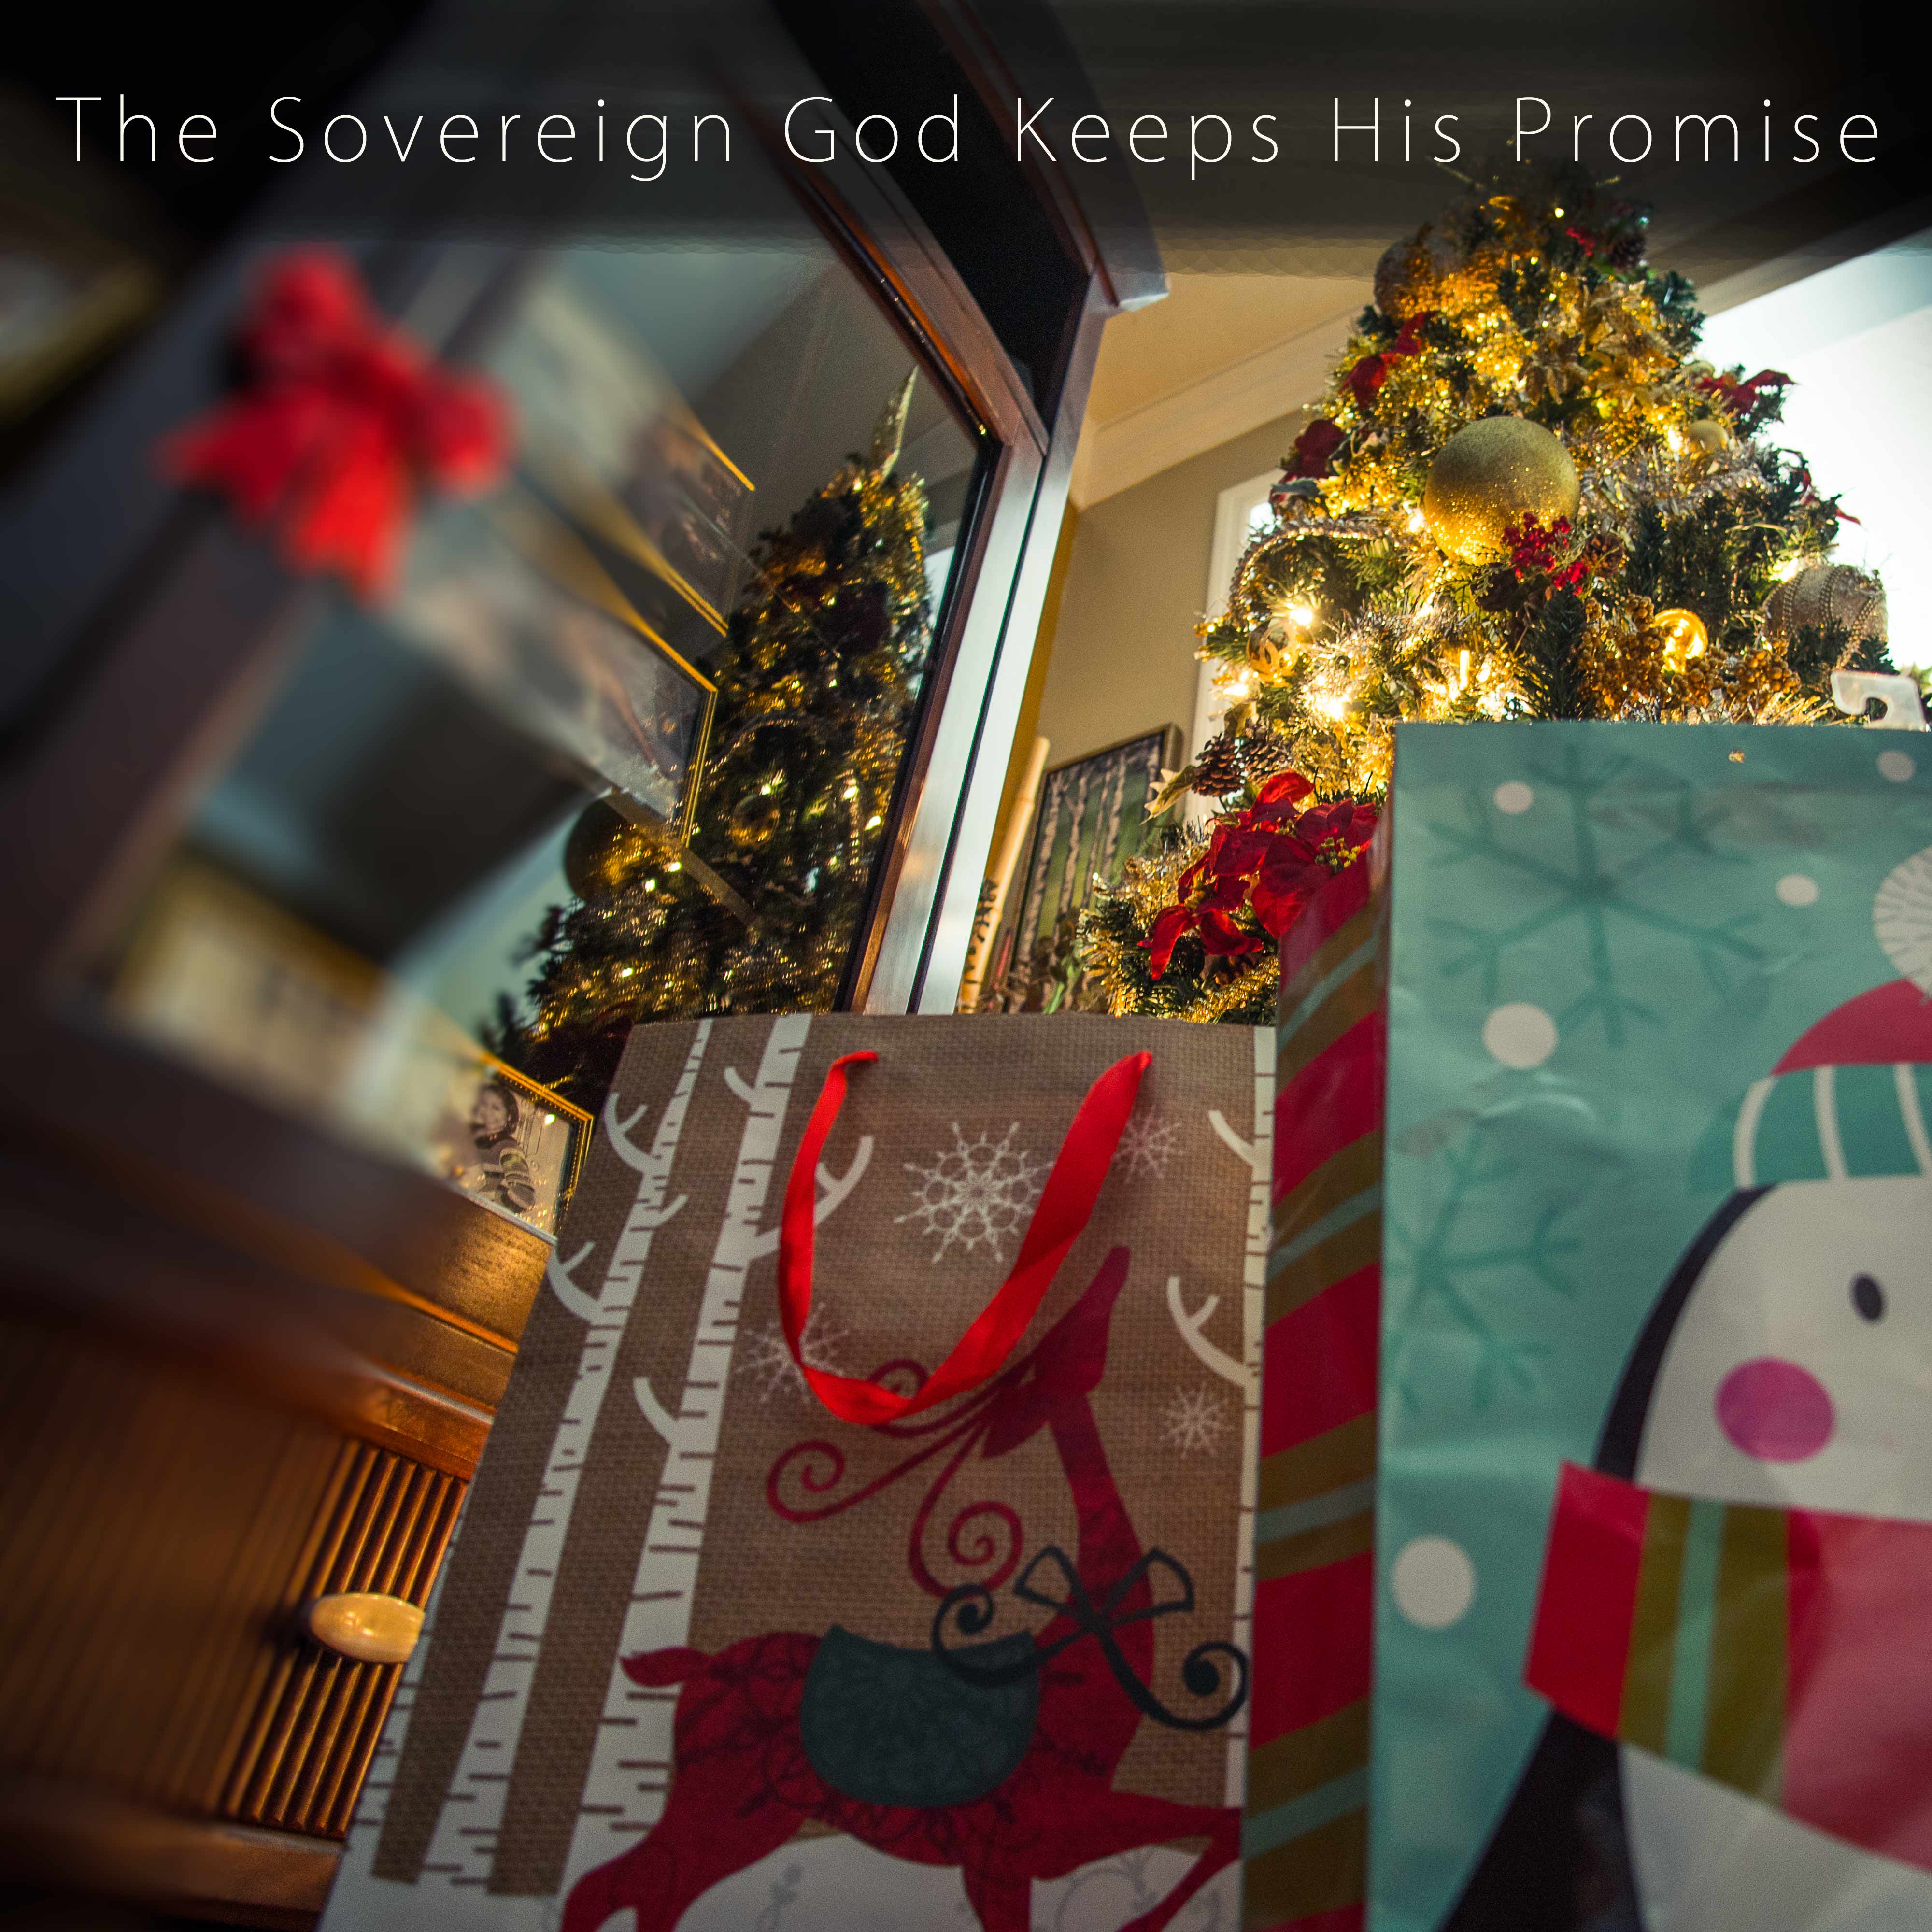 The Sovereign God Keeps His Promise